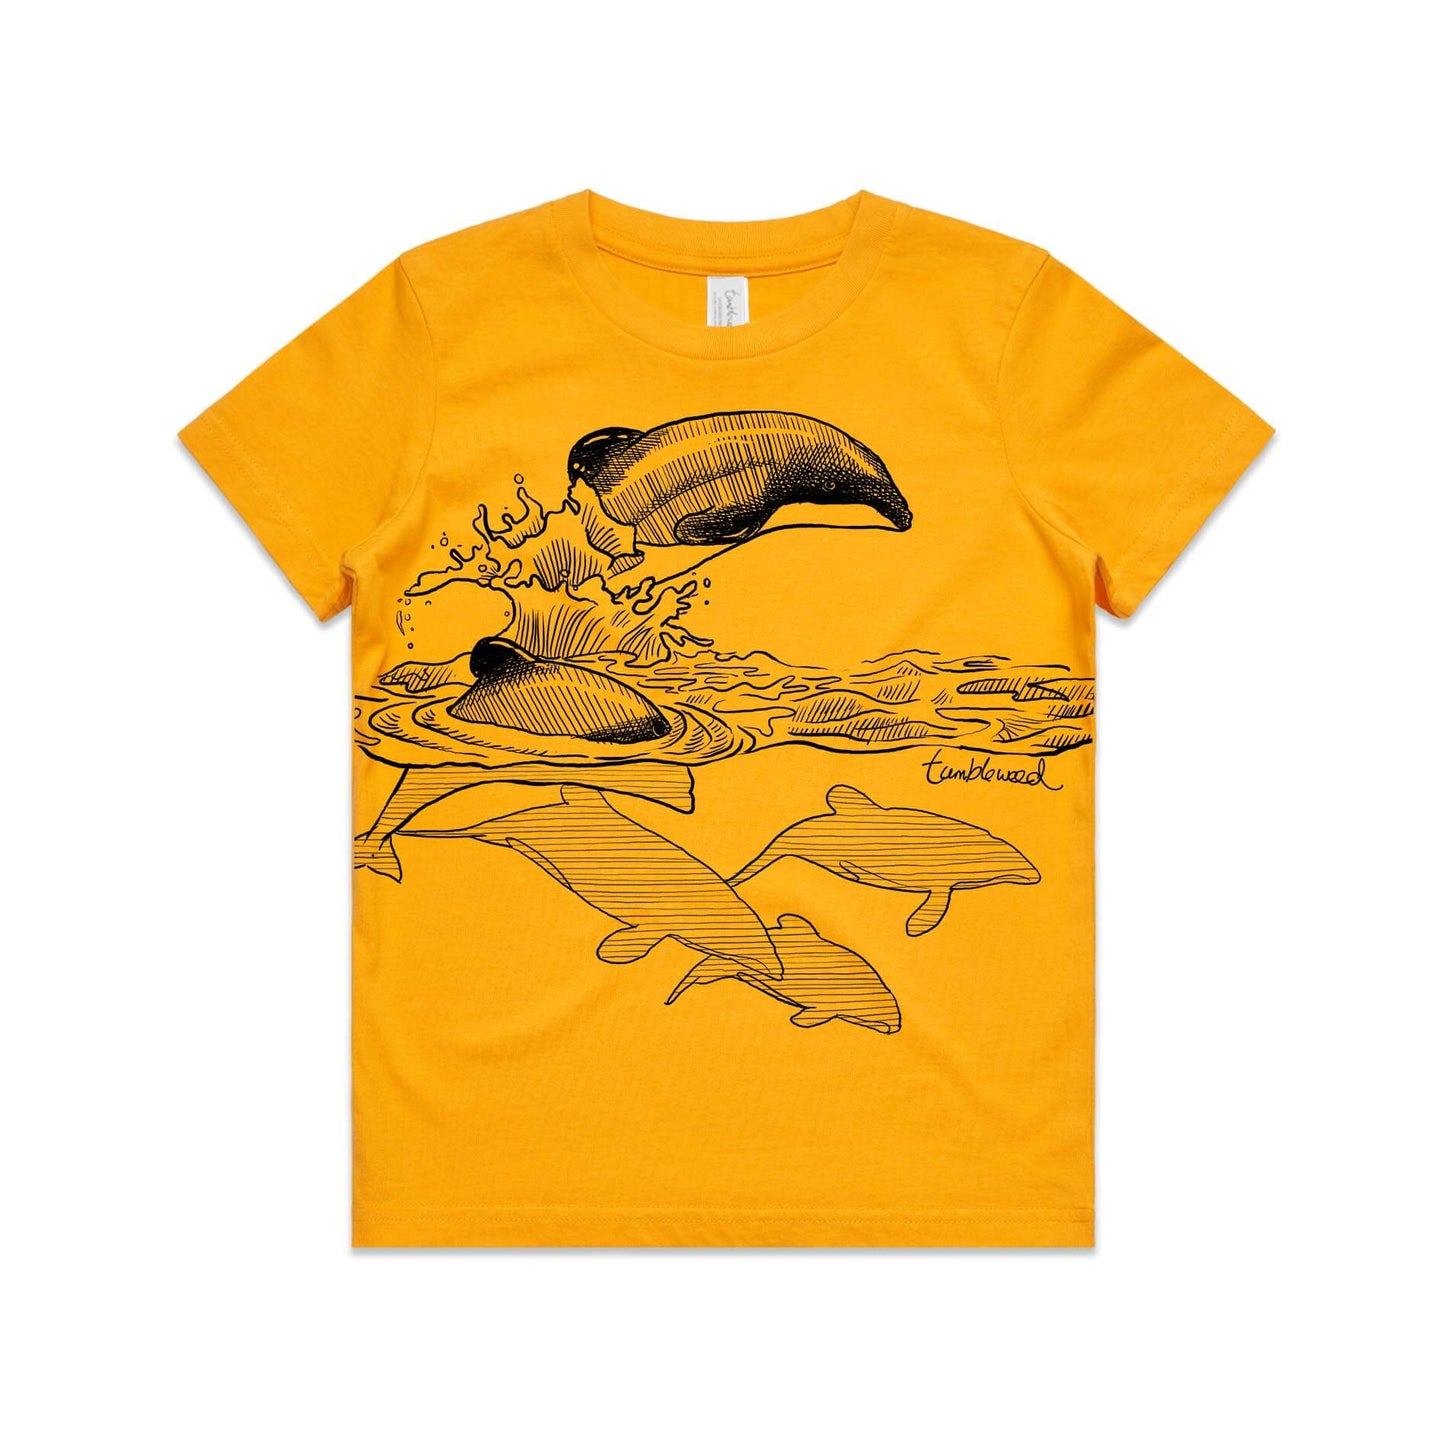 Gold, cotton kids' t-shirt with screen printed ducks maui dolphin design.